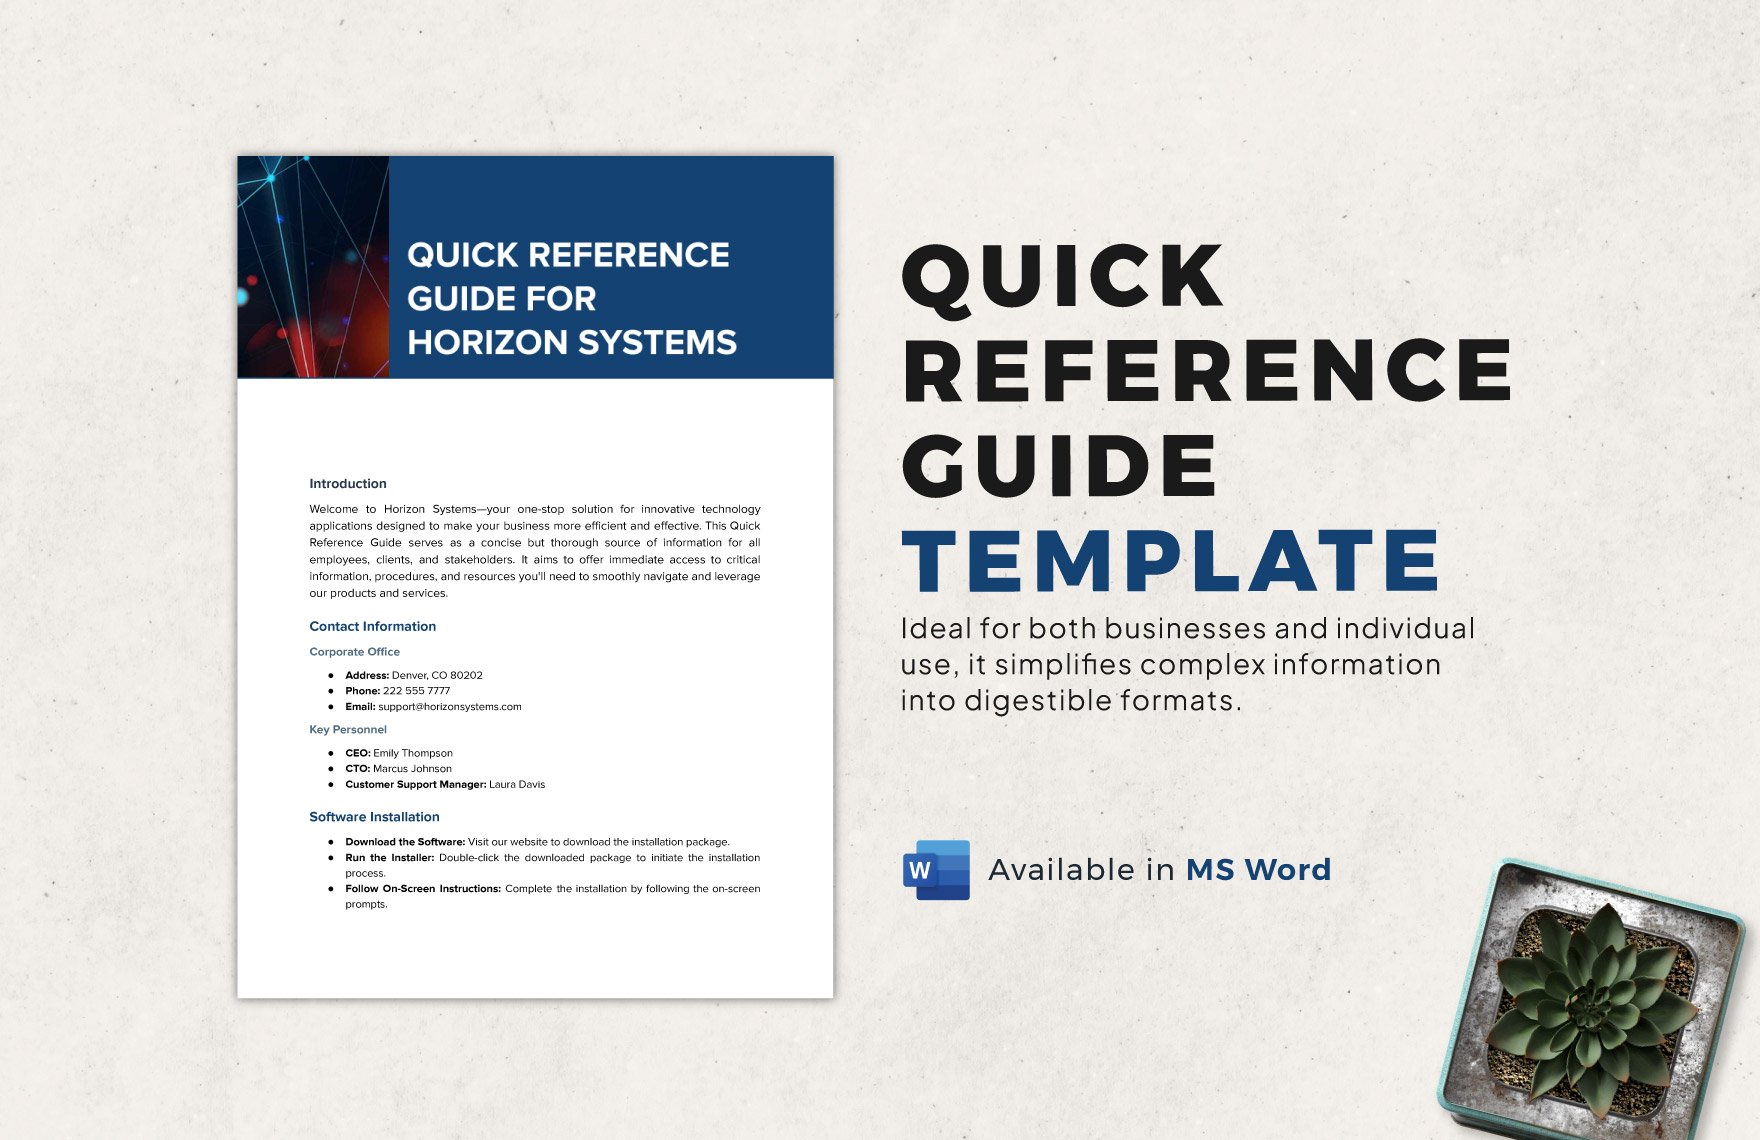 Quick Reference Guide Template in Word